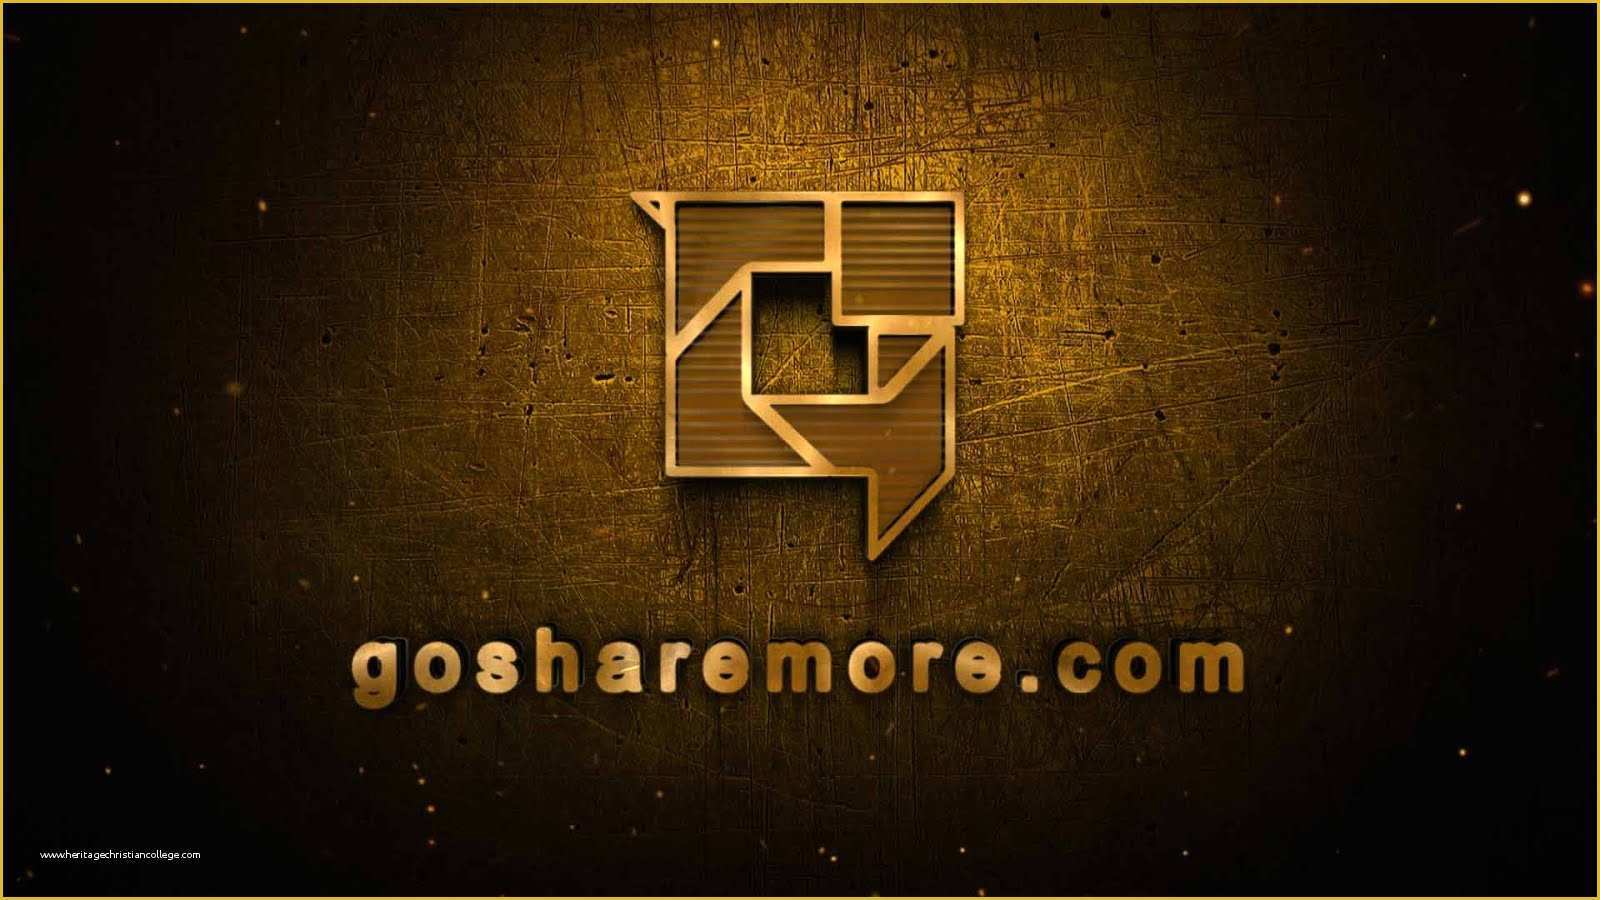 Editable after Effects Templates Free Download Of after Effects Template Golden Logo Reveal Gosharemore